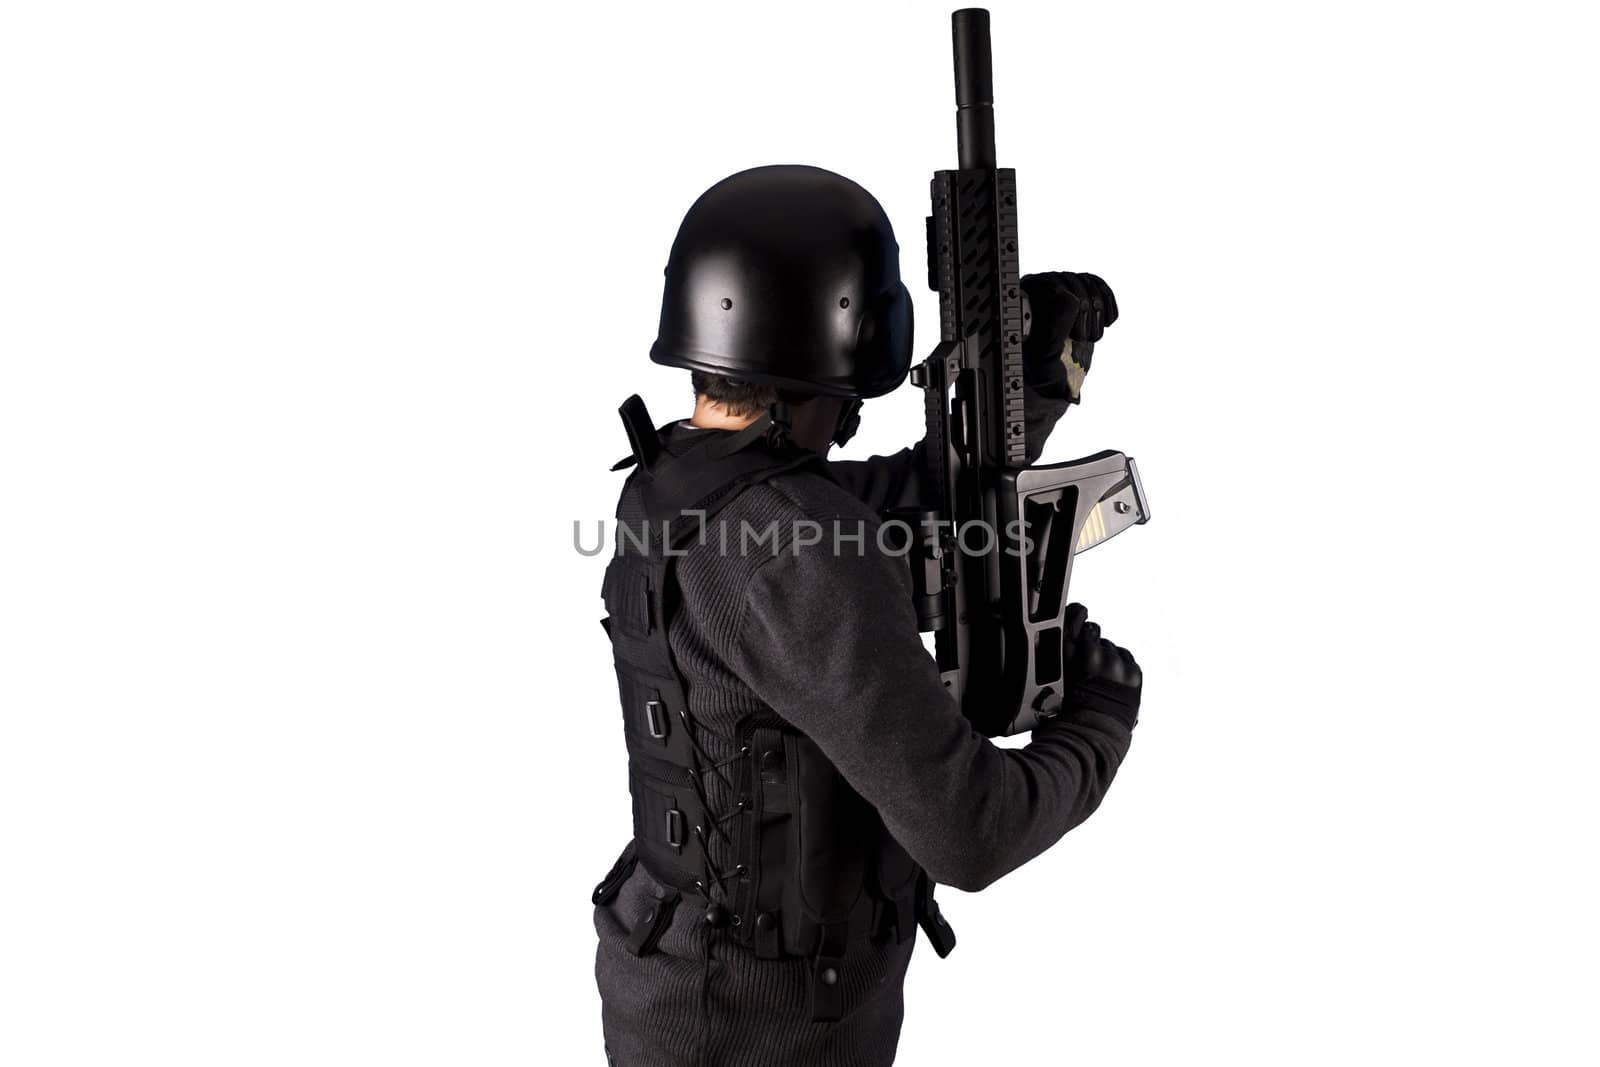 Airport security, Armed policeman shooting, isolated on white by FernandoCortes